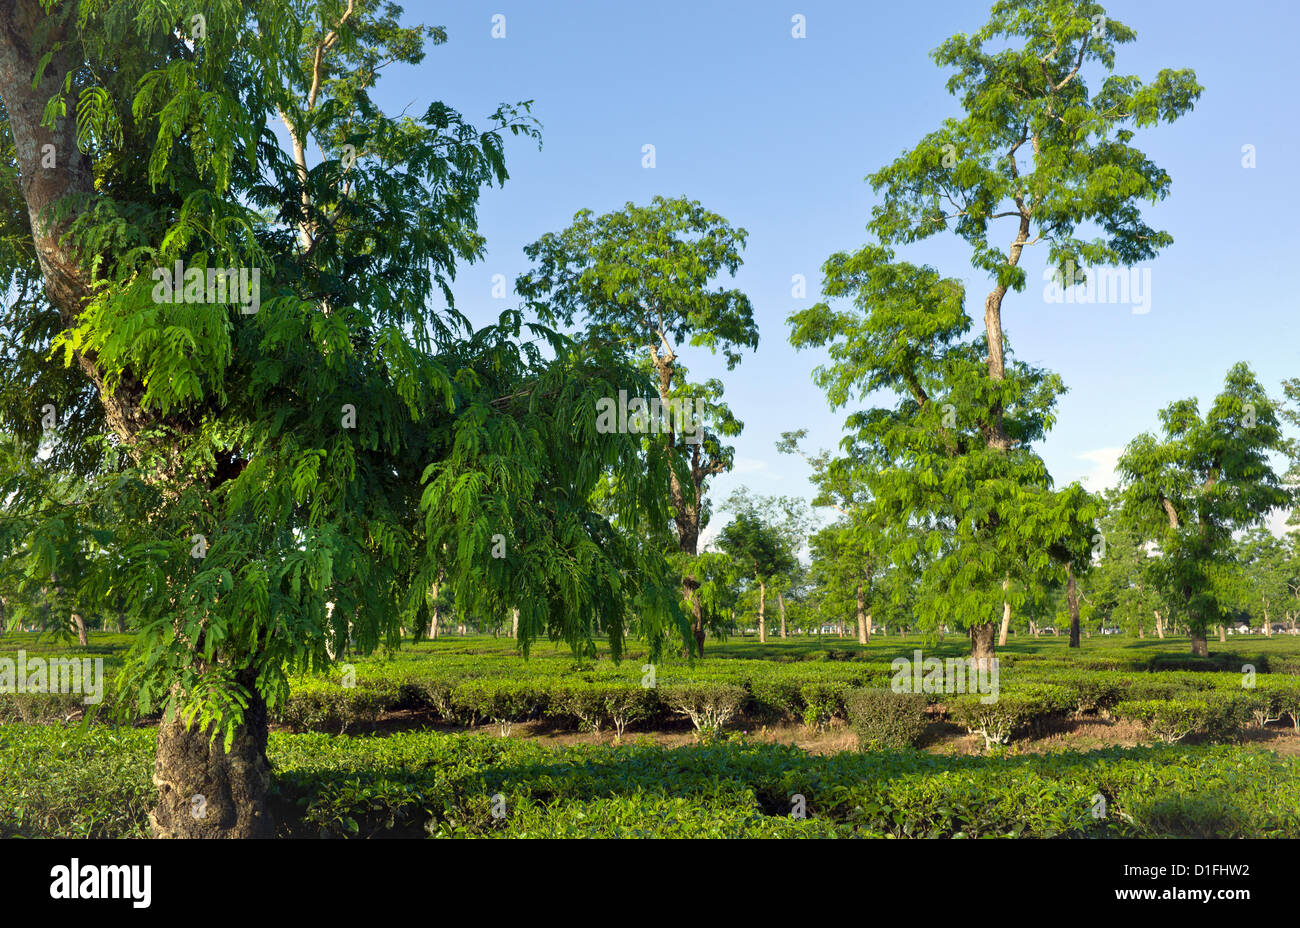 View of a tea plantation in Jorhat, Assam, north east India. Tall leafy trees offer shade to the tea trees below. Stock Photo